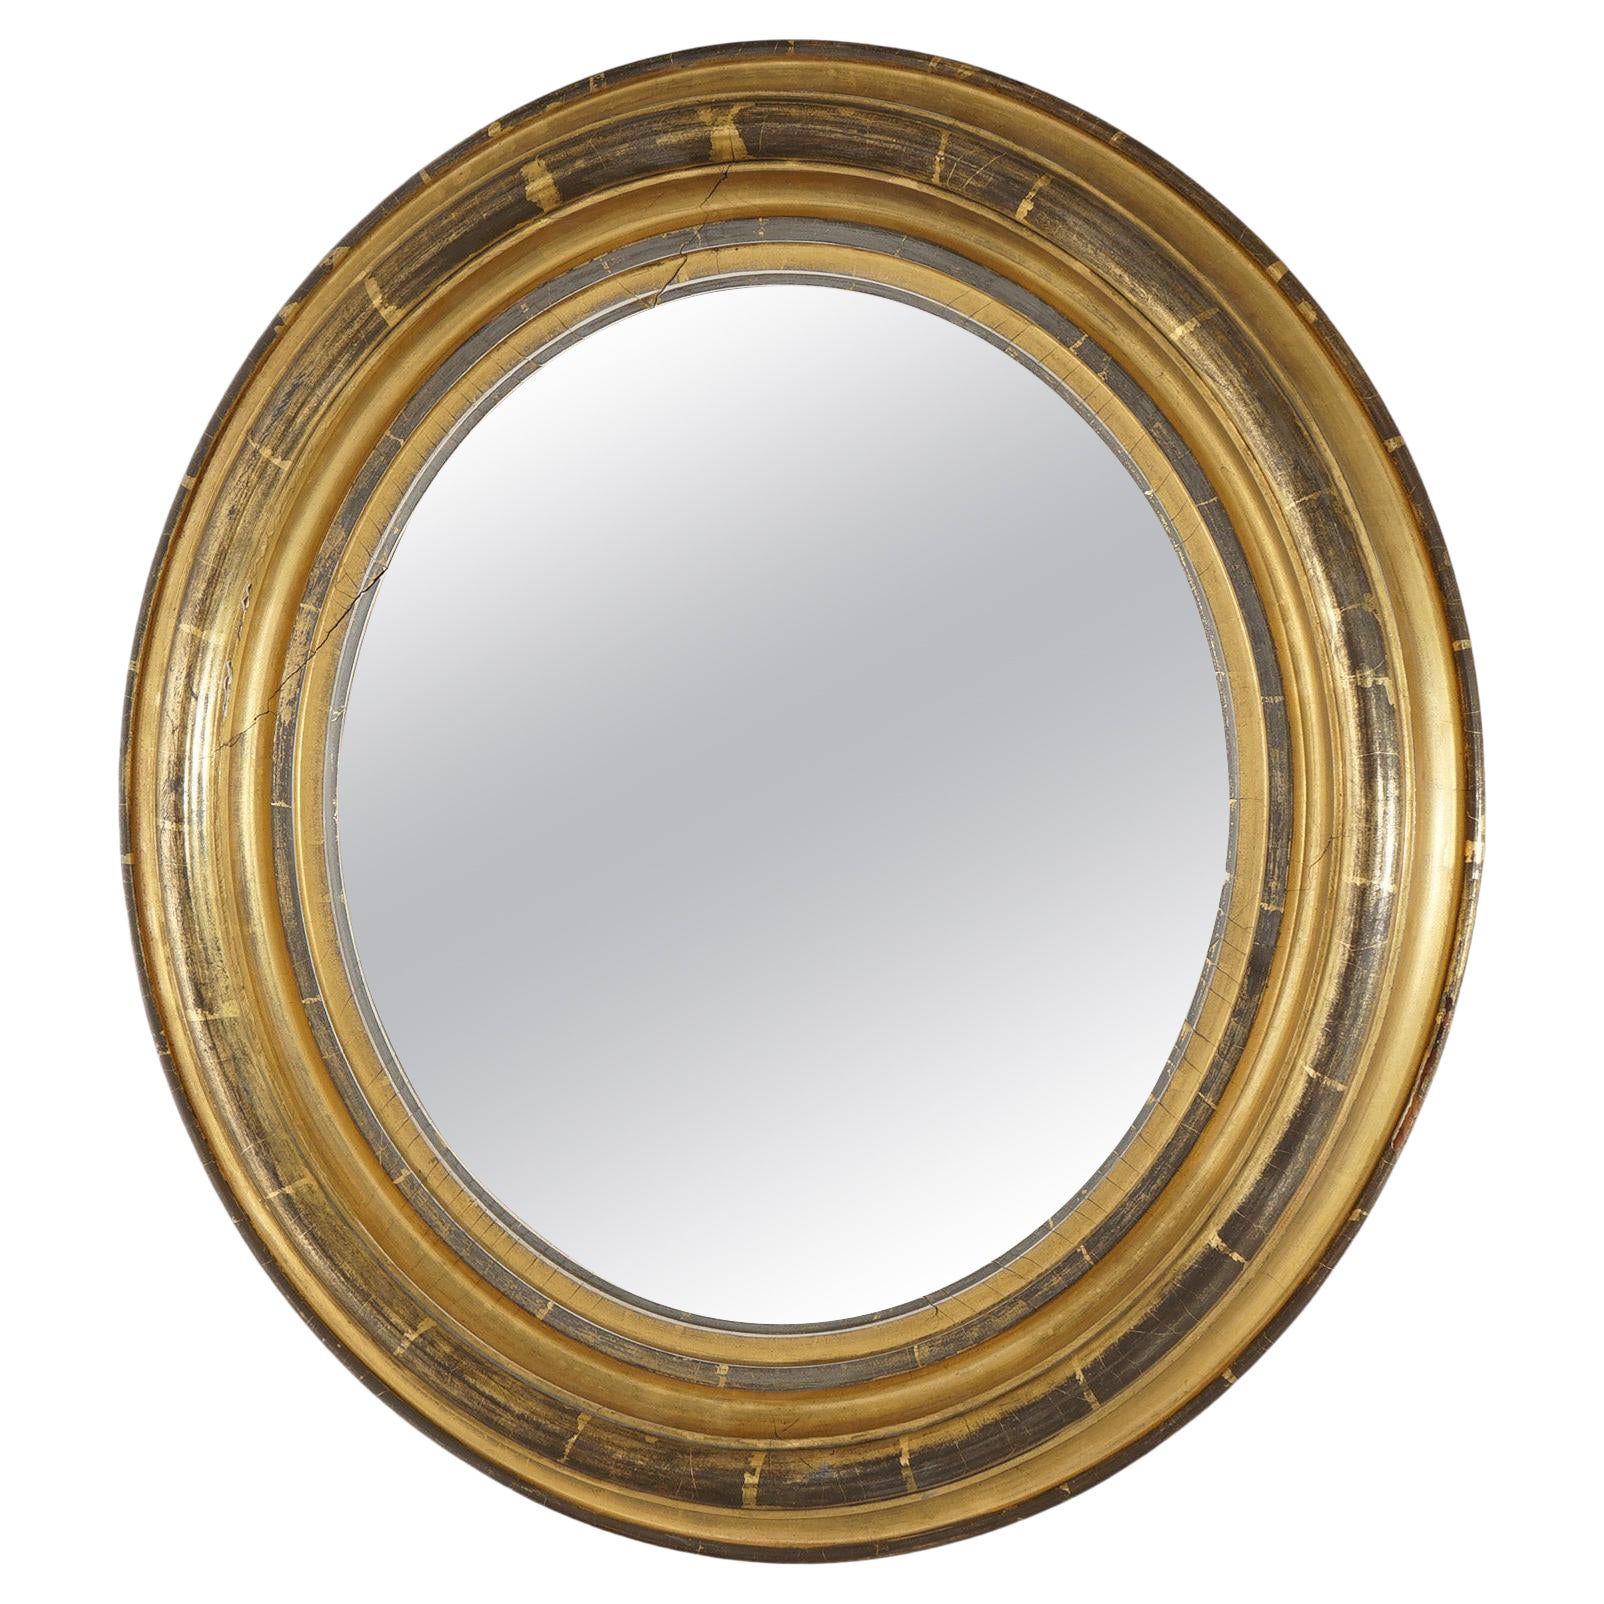 Antique American Empire First Finish Giltwood Framed Oval Wall Mirror Circa 1840 For Sale